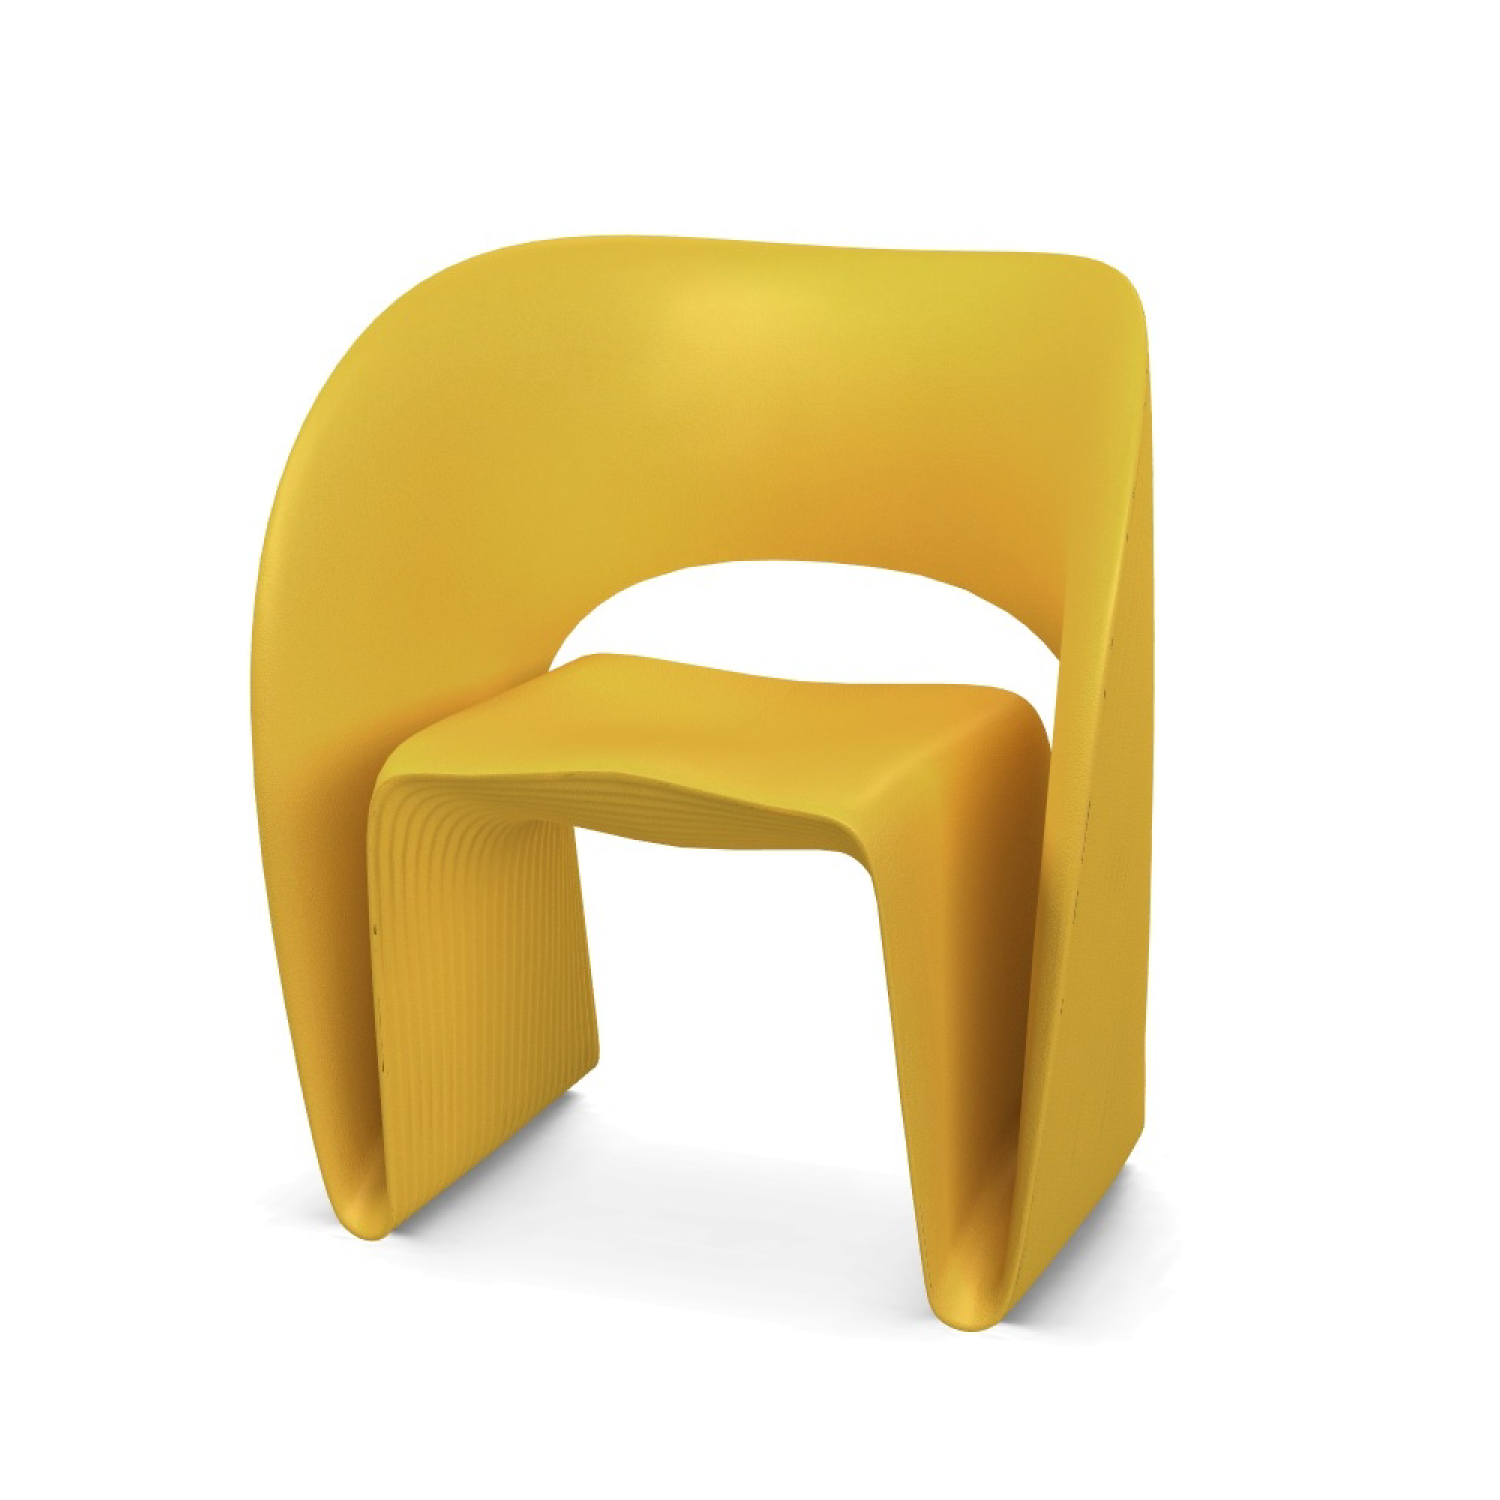 Raviolo Chair (8 colors)